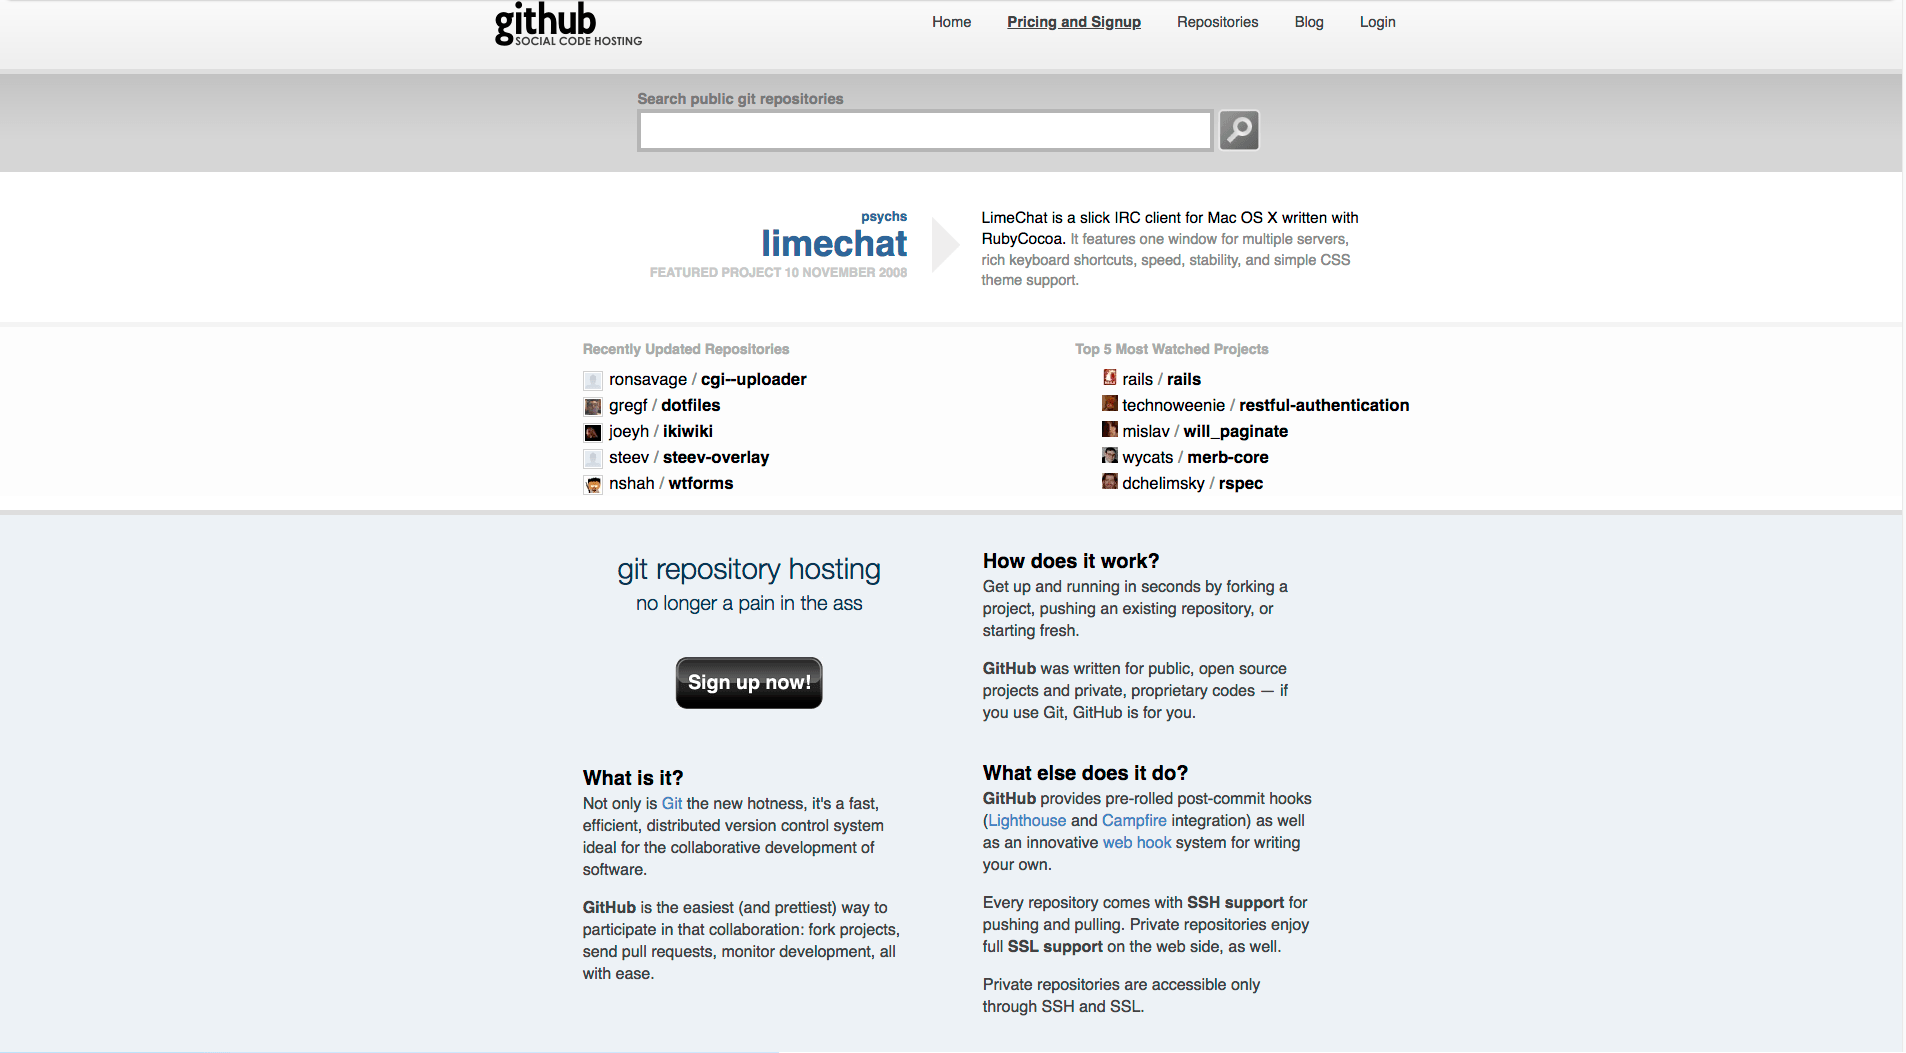 Github, having just started out in 2008